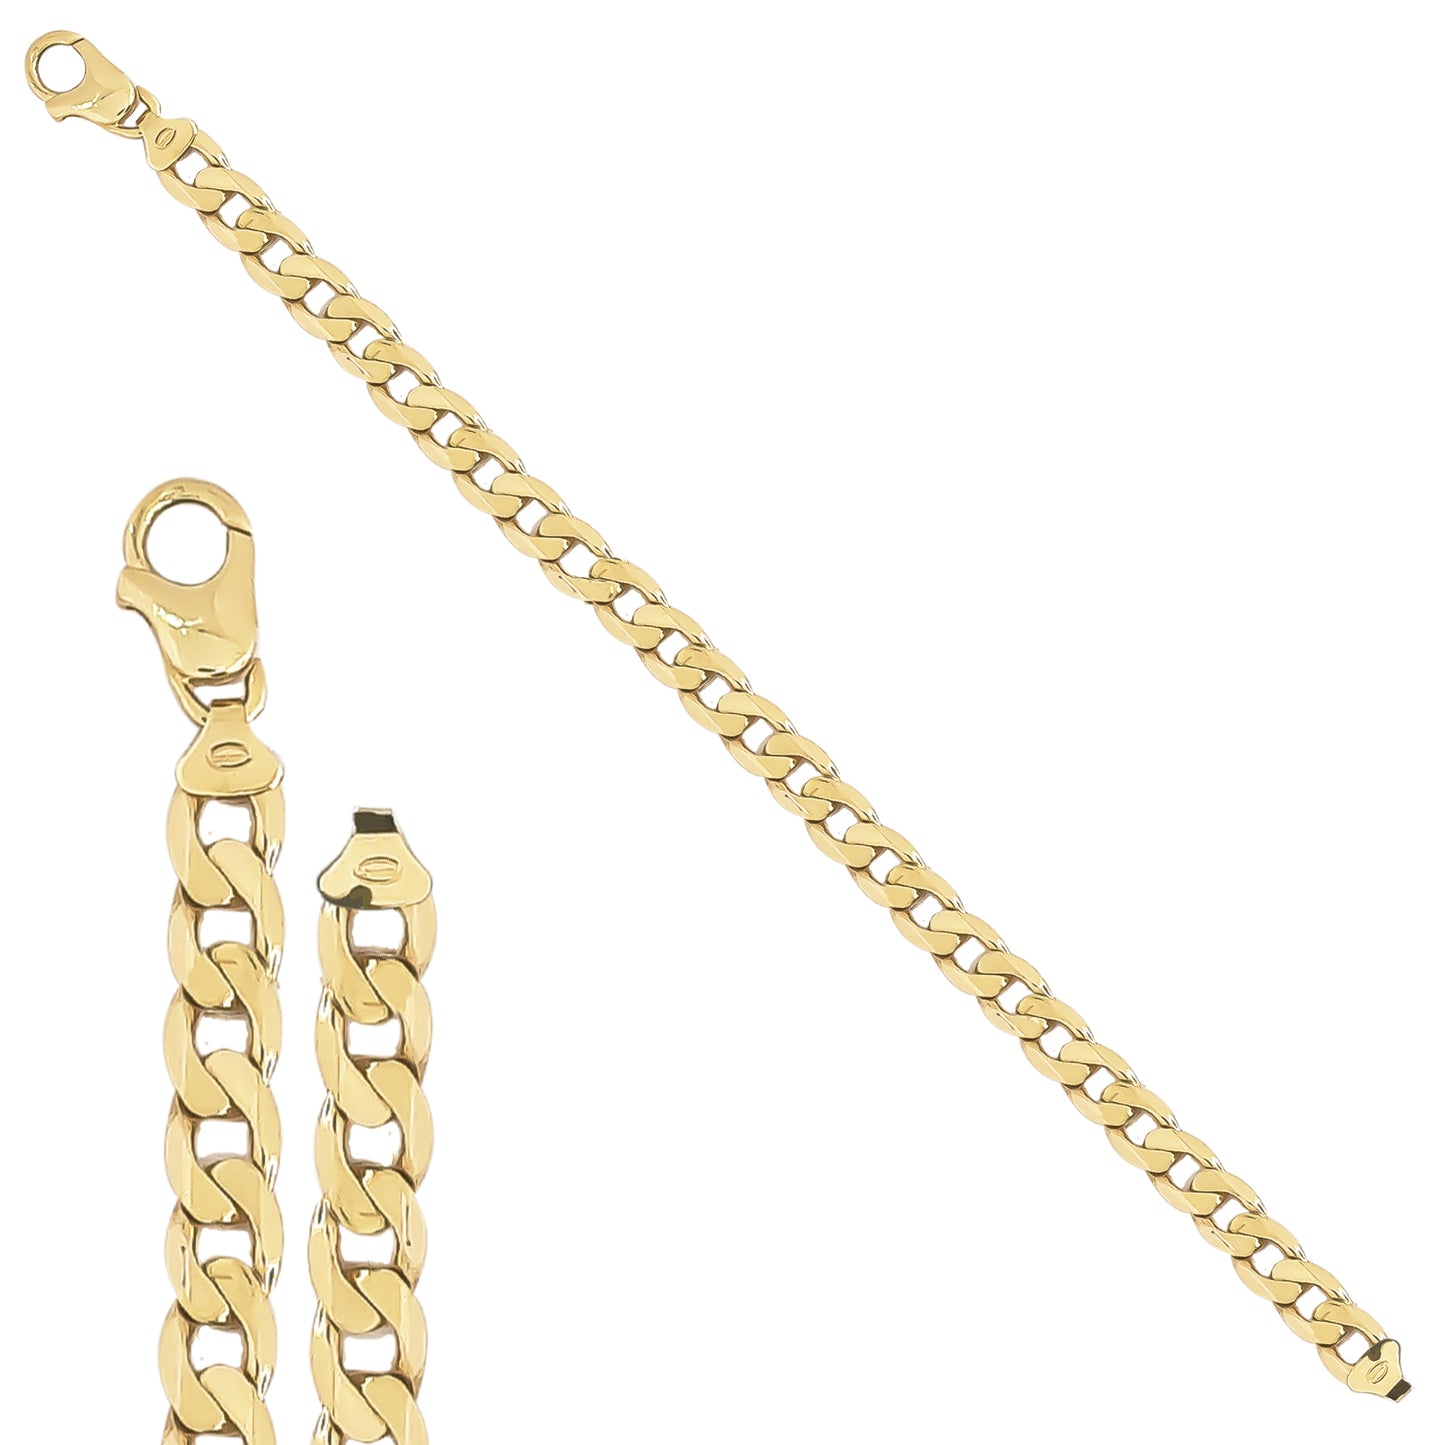 8mm Curb Link Gents Bracelet in 9ct Yellow Gold